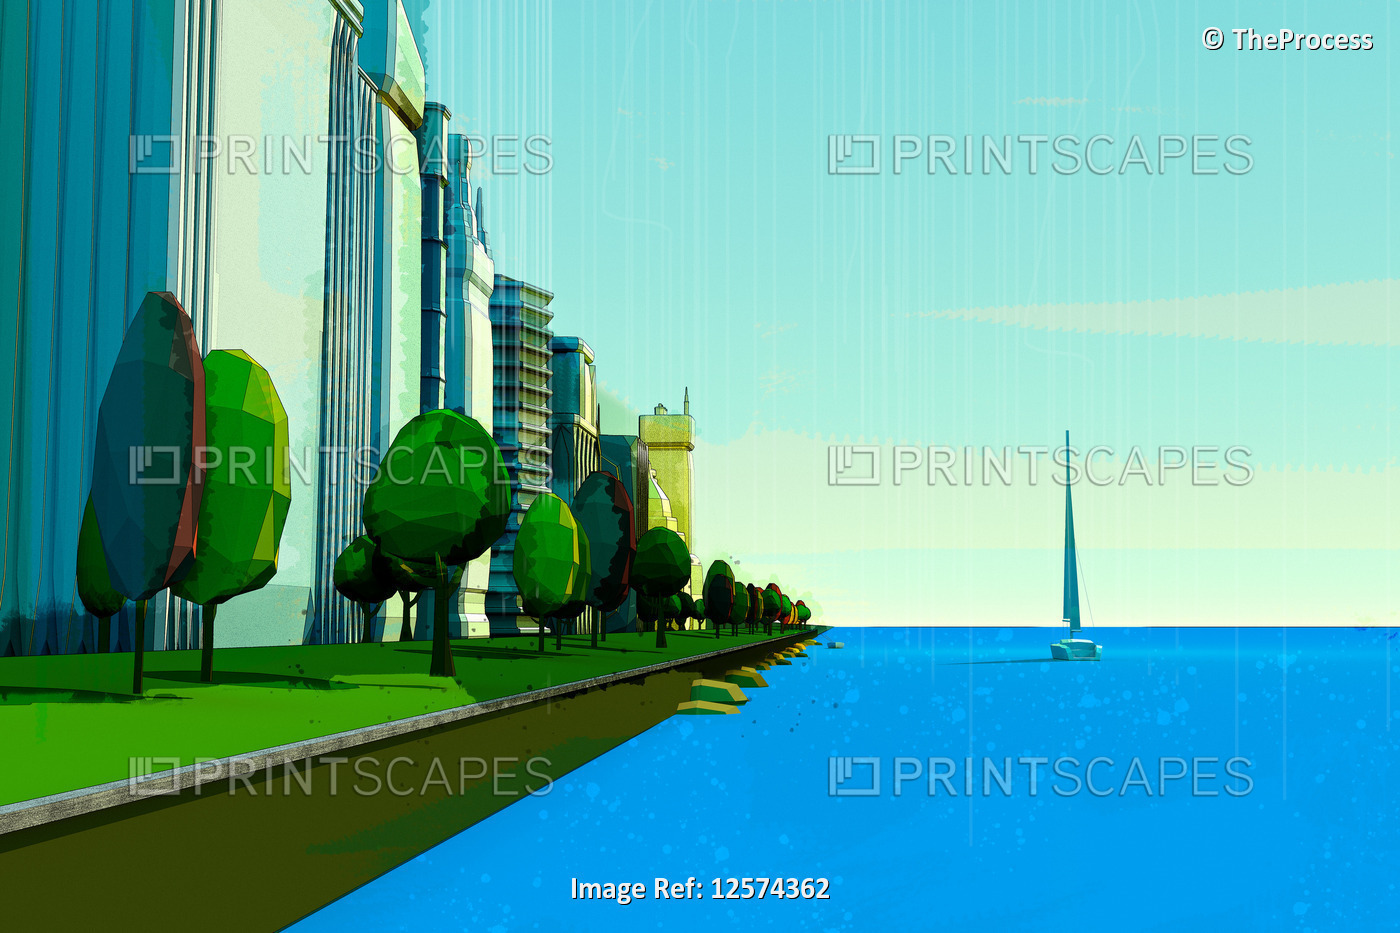 Mixed media artwork on an urban coastline with buildings and sailboat